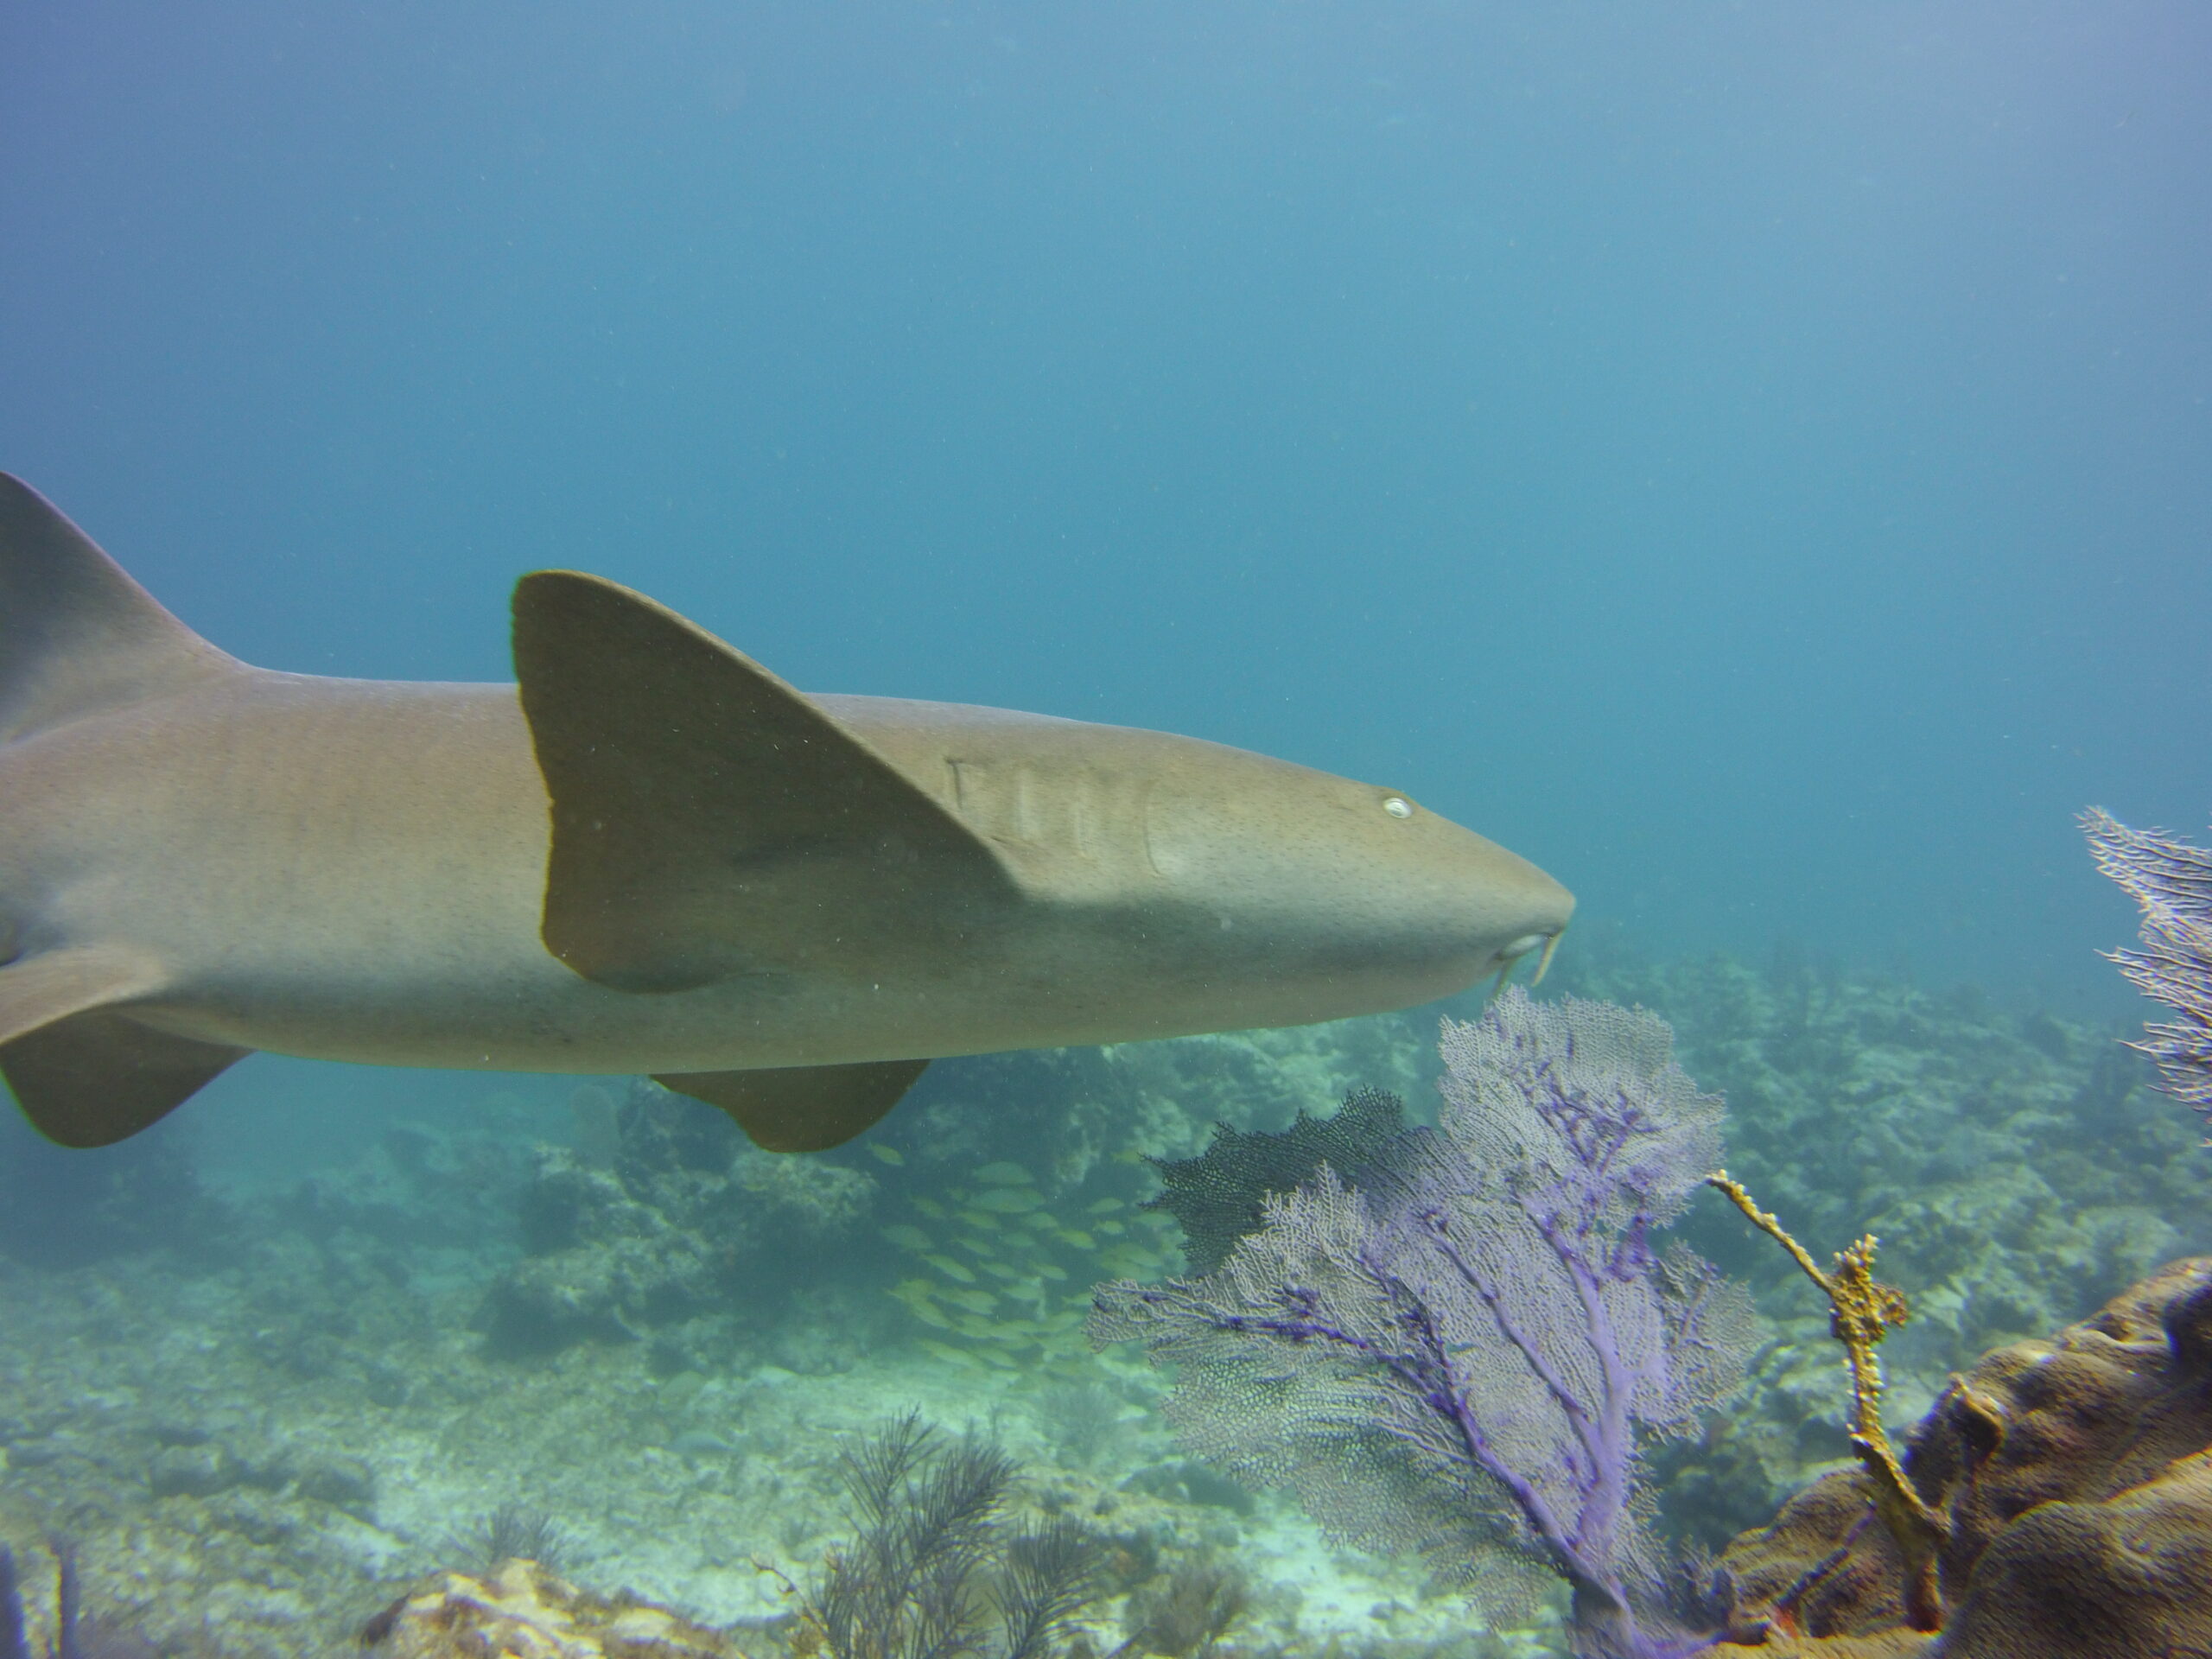 Nurse shark swims right in front of diver